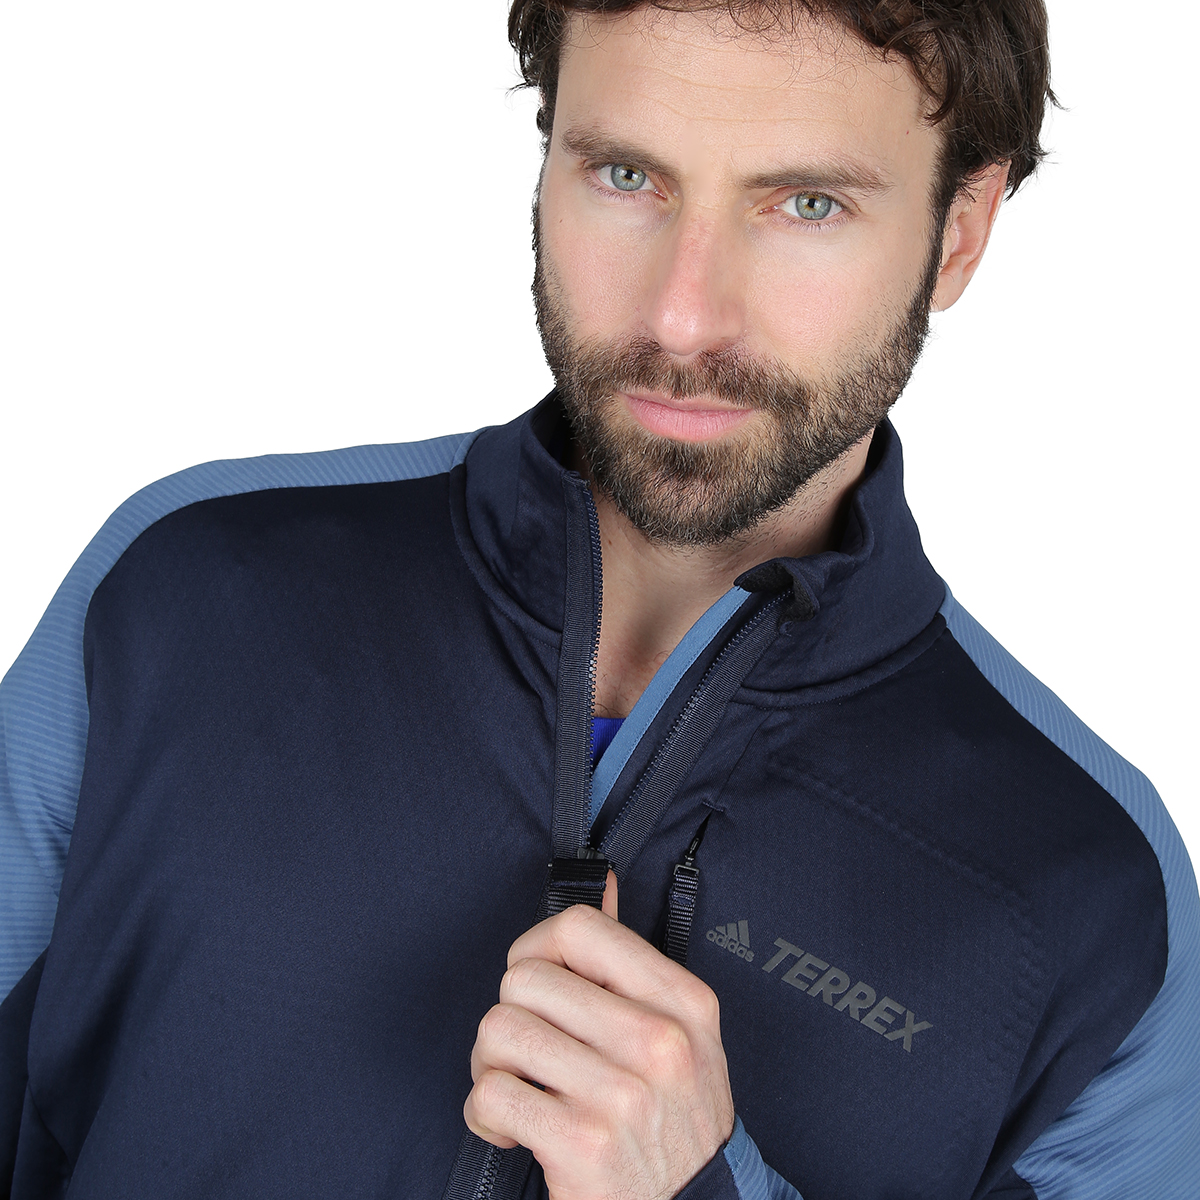 Campera Outdoor adidas Tx Flooce Hombre,  image number null